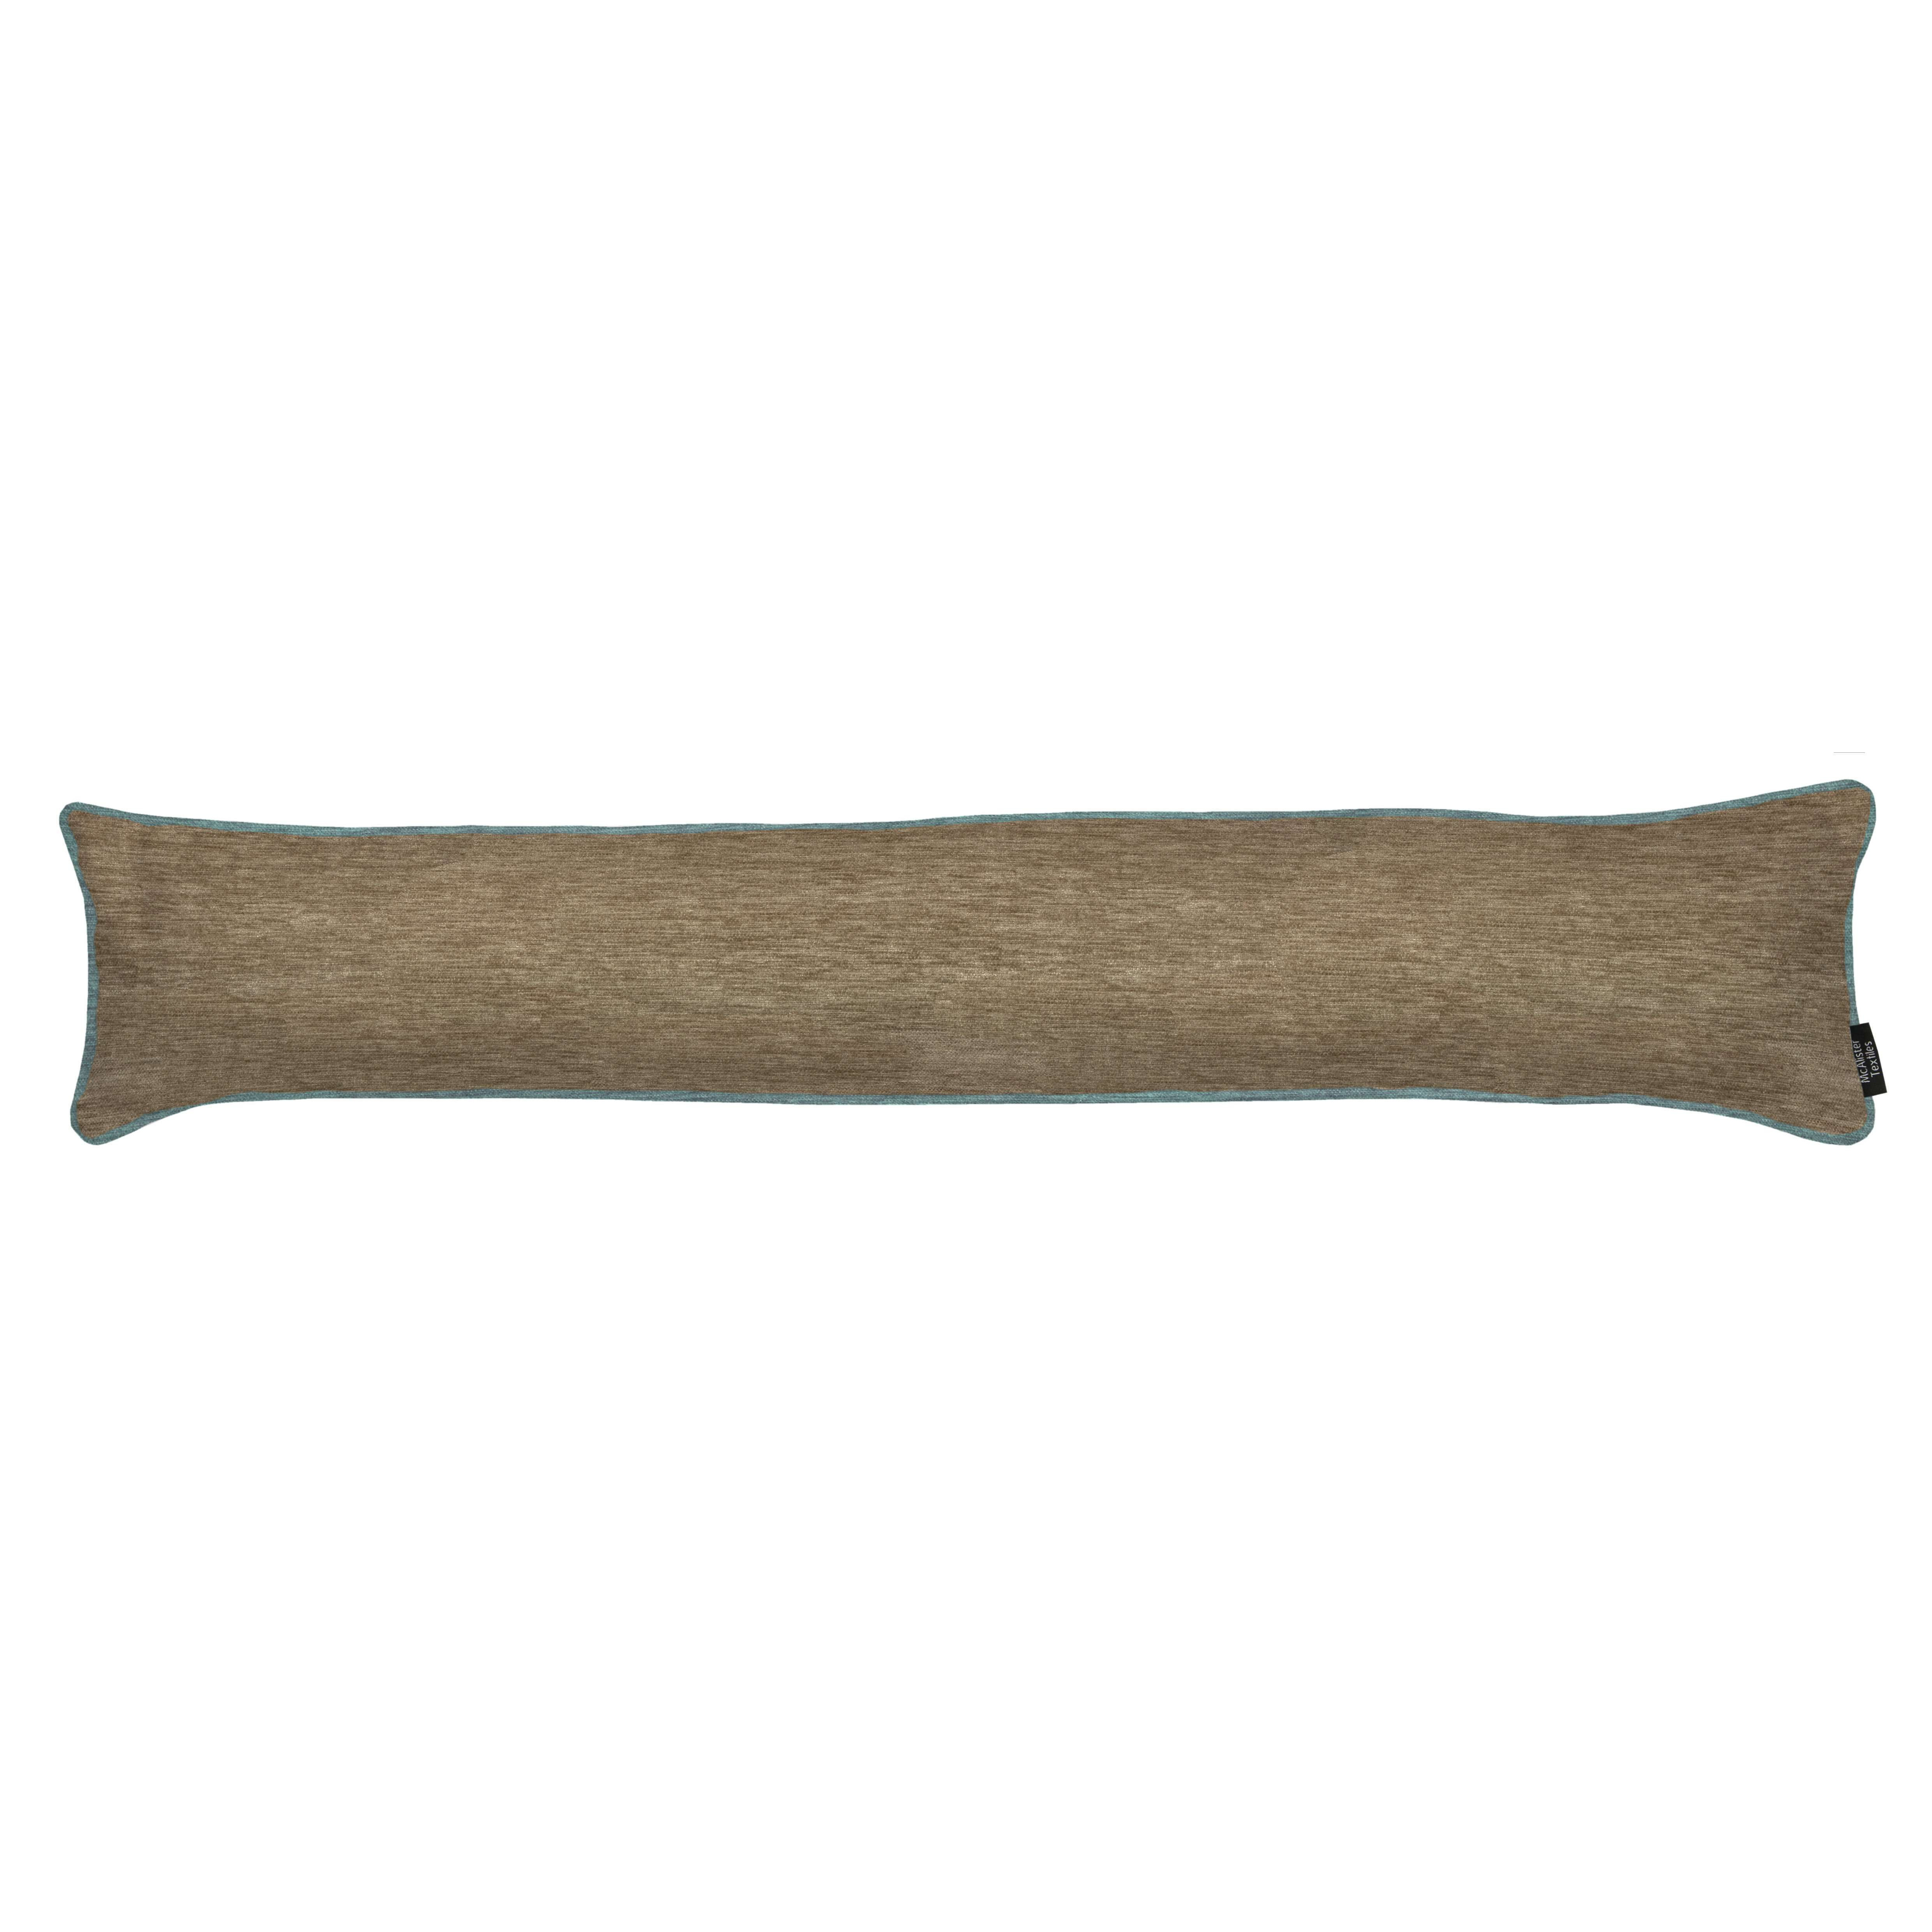 Plain Chenille Contrast Piped Beige + Blue Draught Excluder, 18cm x 80cm